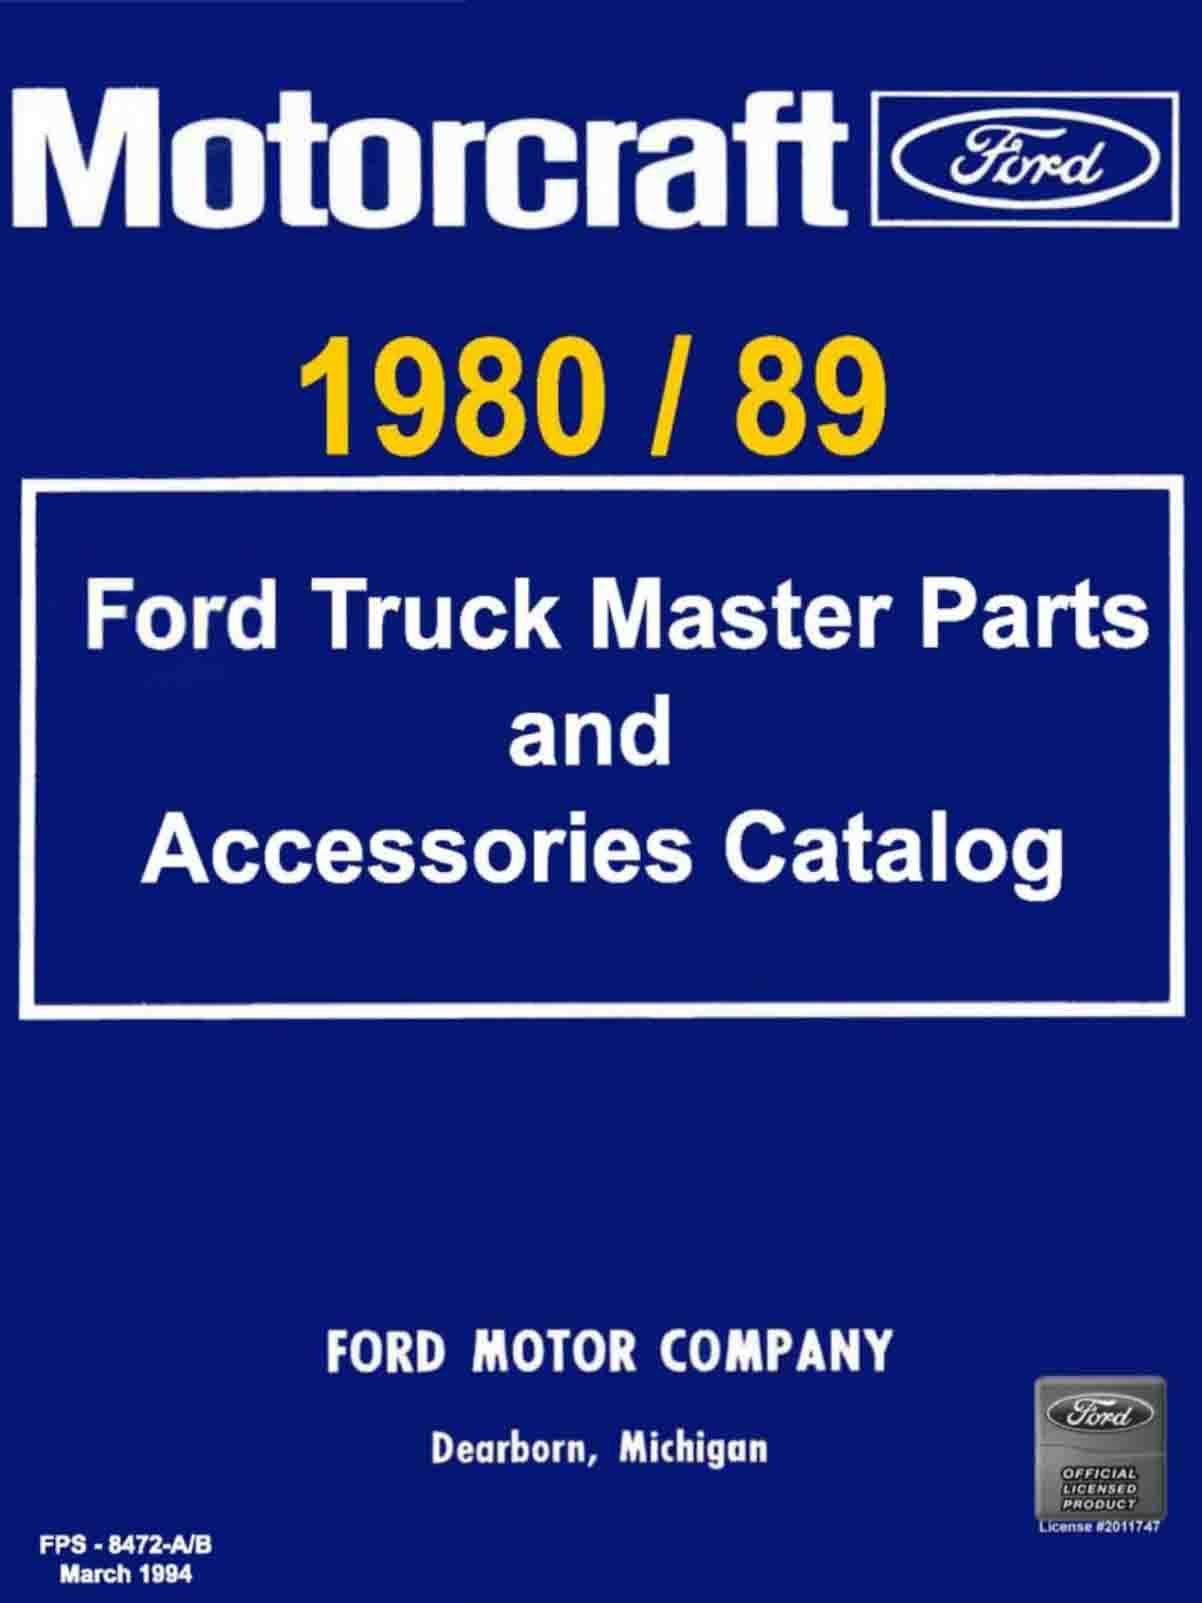 1980, 1981, 1982, 1983, 1984, 1985, 1986, 1987, 1988, and 1989 Ford Truck Parts Catalog